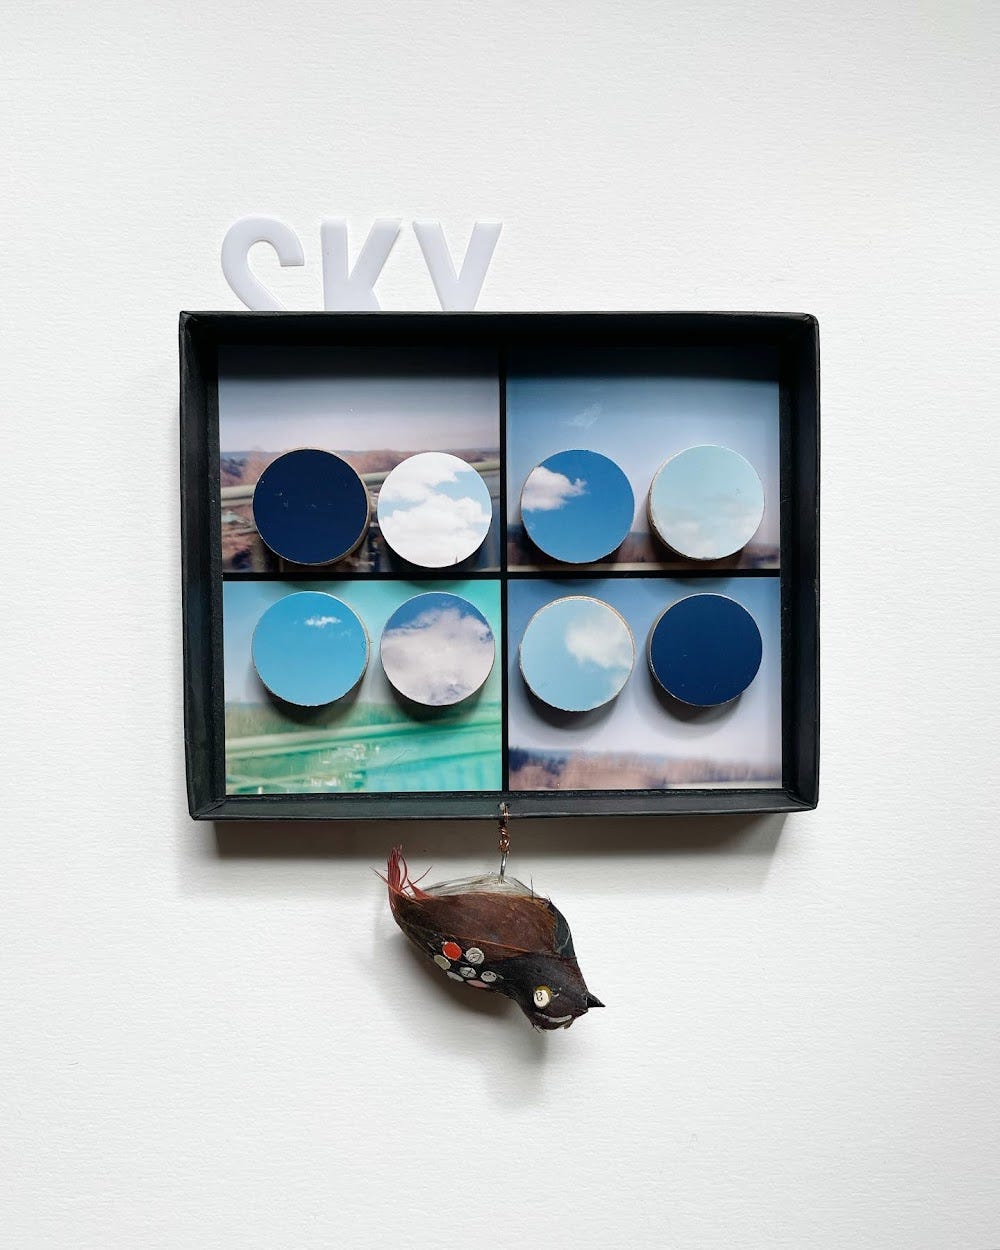 Mixed media collage; a black box for photos holds a snapshot with 4 landscape views, overlaid by 8 views of the sky. Plastic letters spelling sky are affixed to the top of the box, and a plastic bird with collaged circles hangs upside down from the bottom of the box with copper wire.